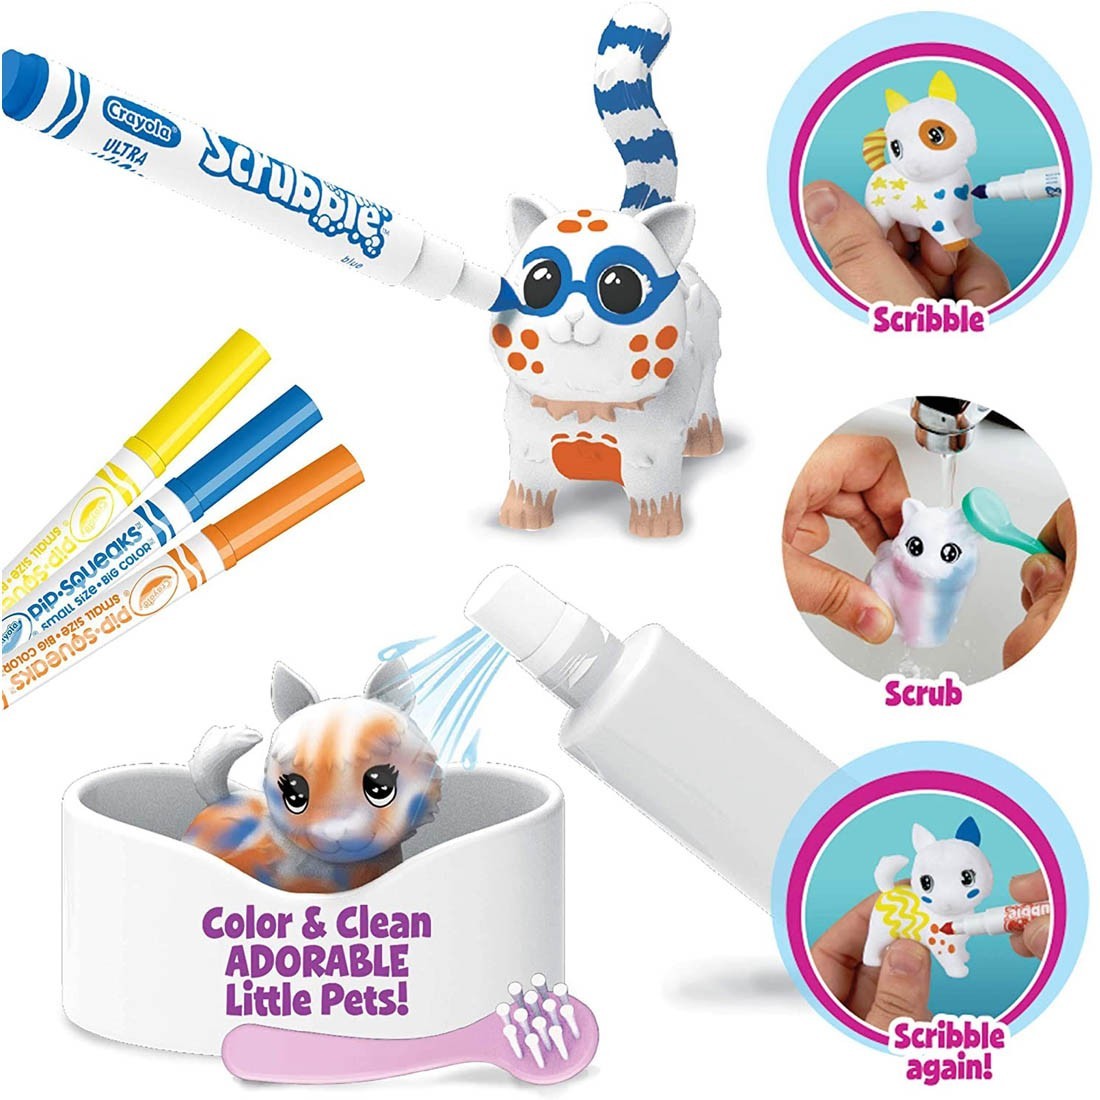 Buy Crayola Washimals Scribble Scrubbie Pets, Vet Clinic Playset - Crayola,  delivered to your home | TheOutfit